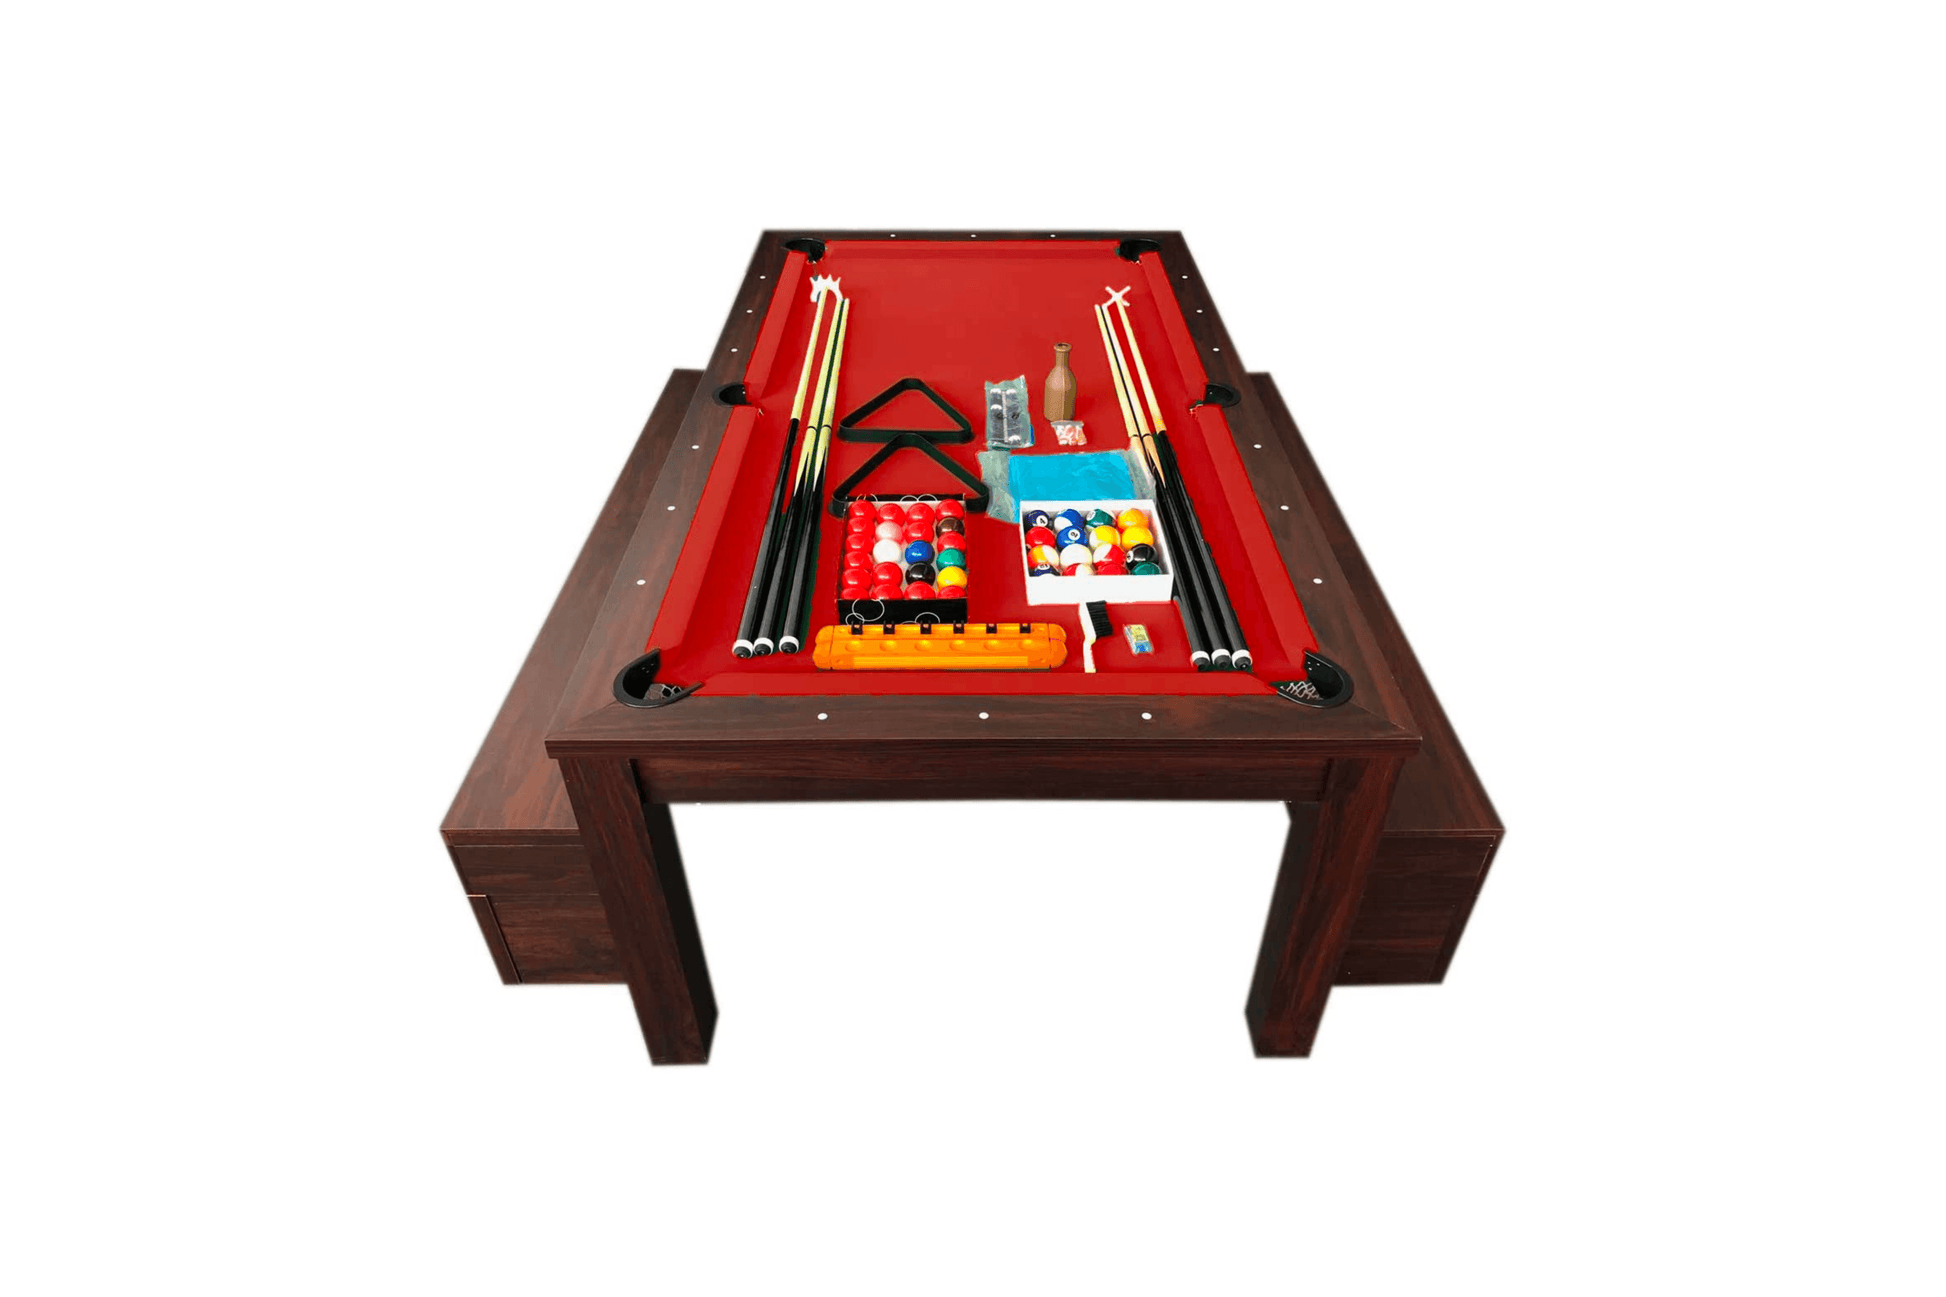 7Ft Pool Table Billiard Became a Dinner Table with Benches Model 18721 - Venini Furniture 